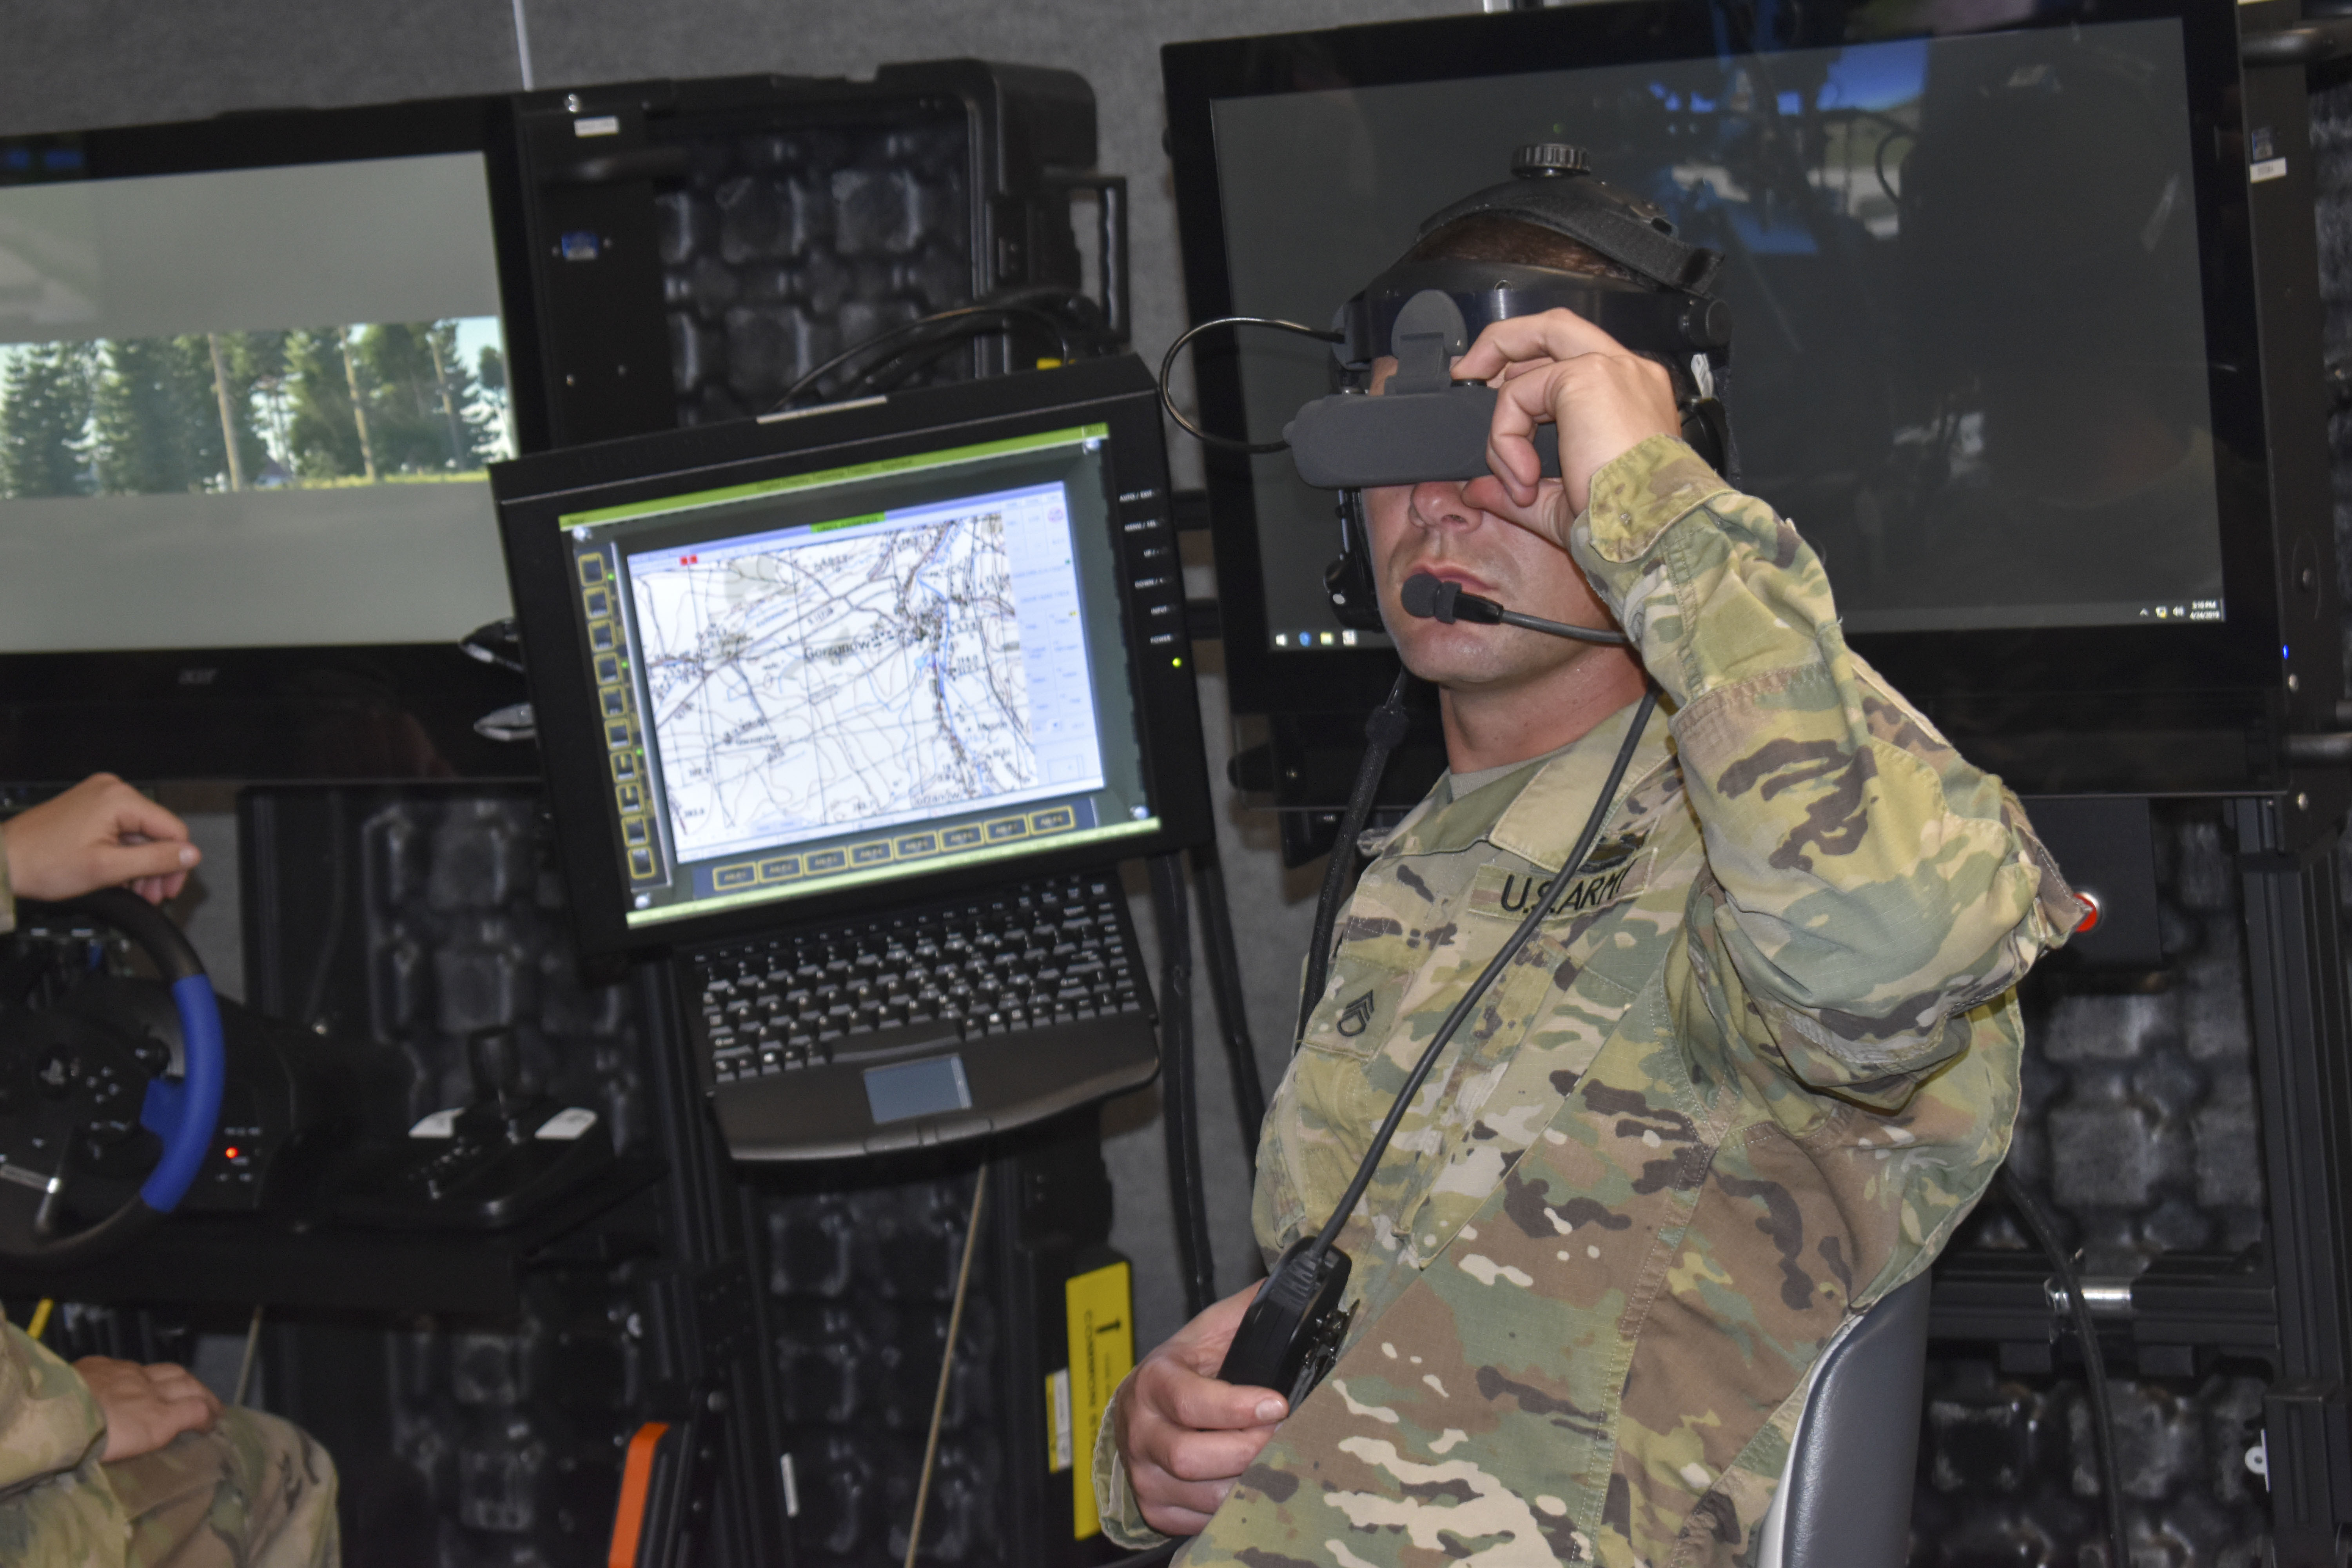 Serious Gaming Design for Adaptability Training of Military Personnel –  CSIAC